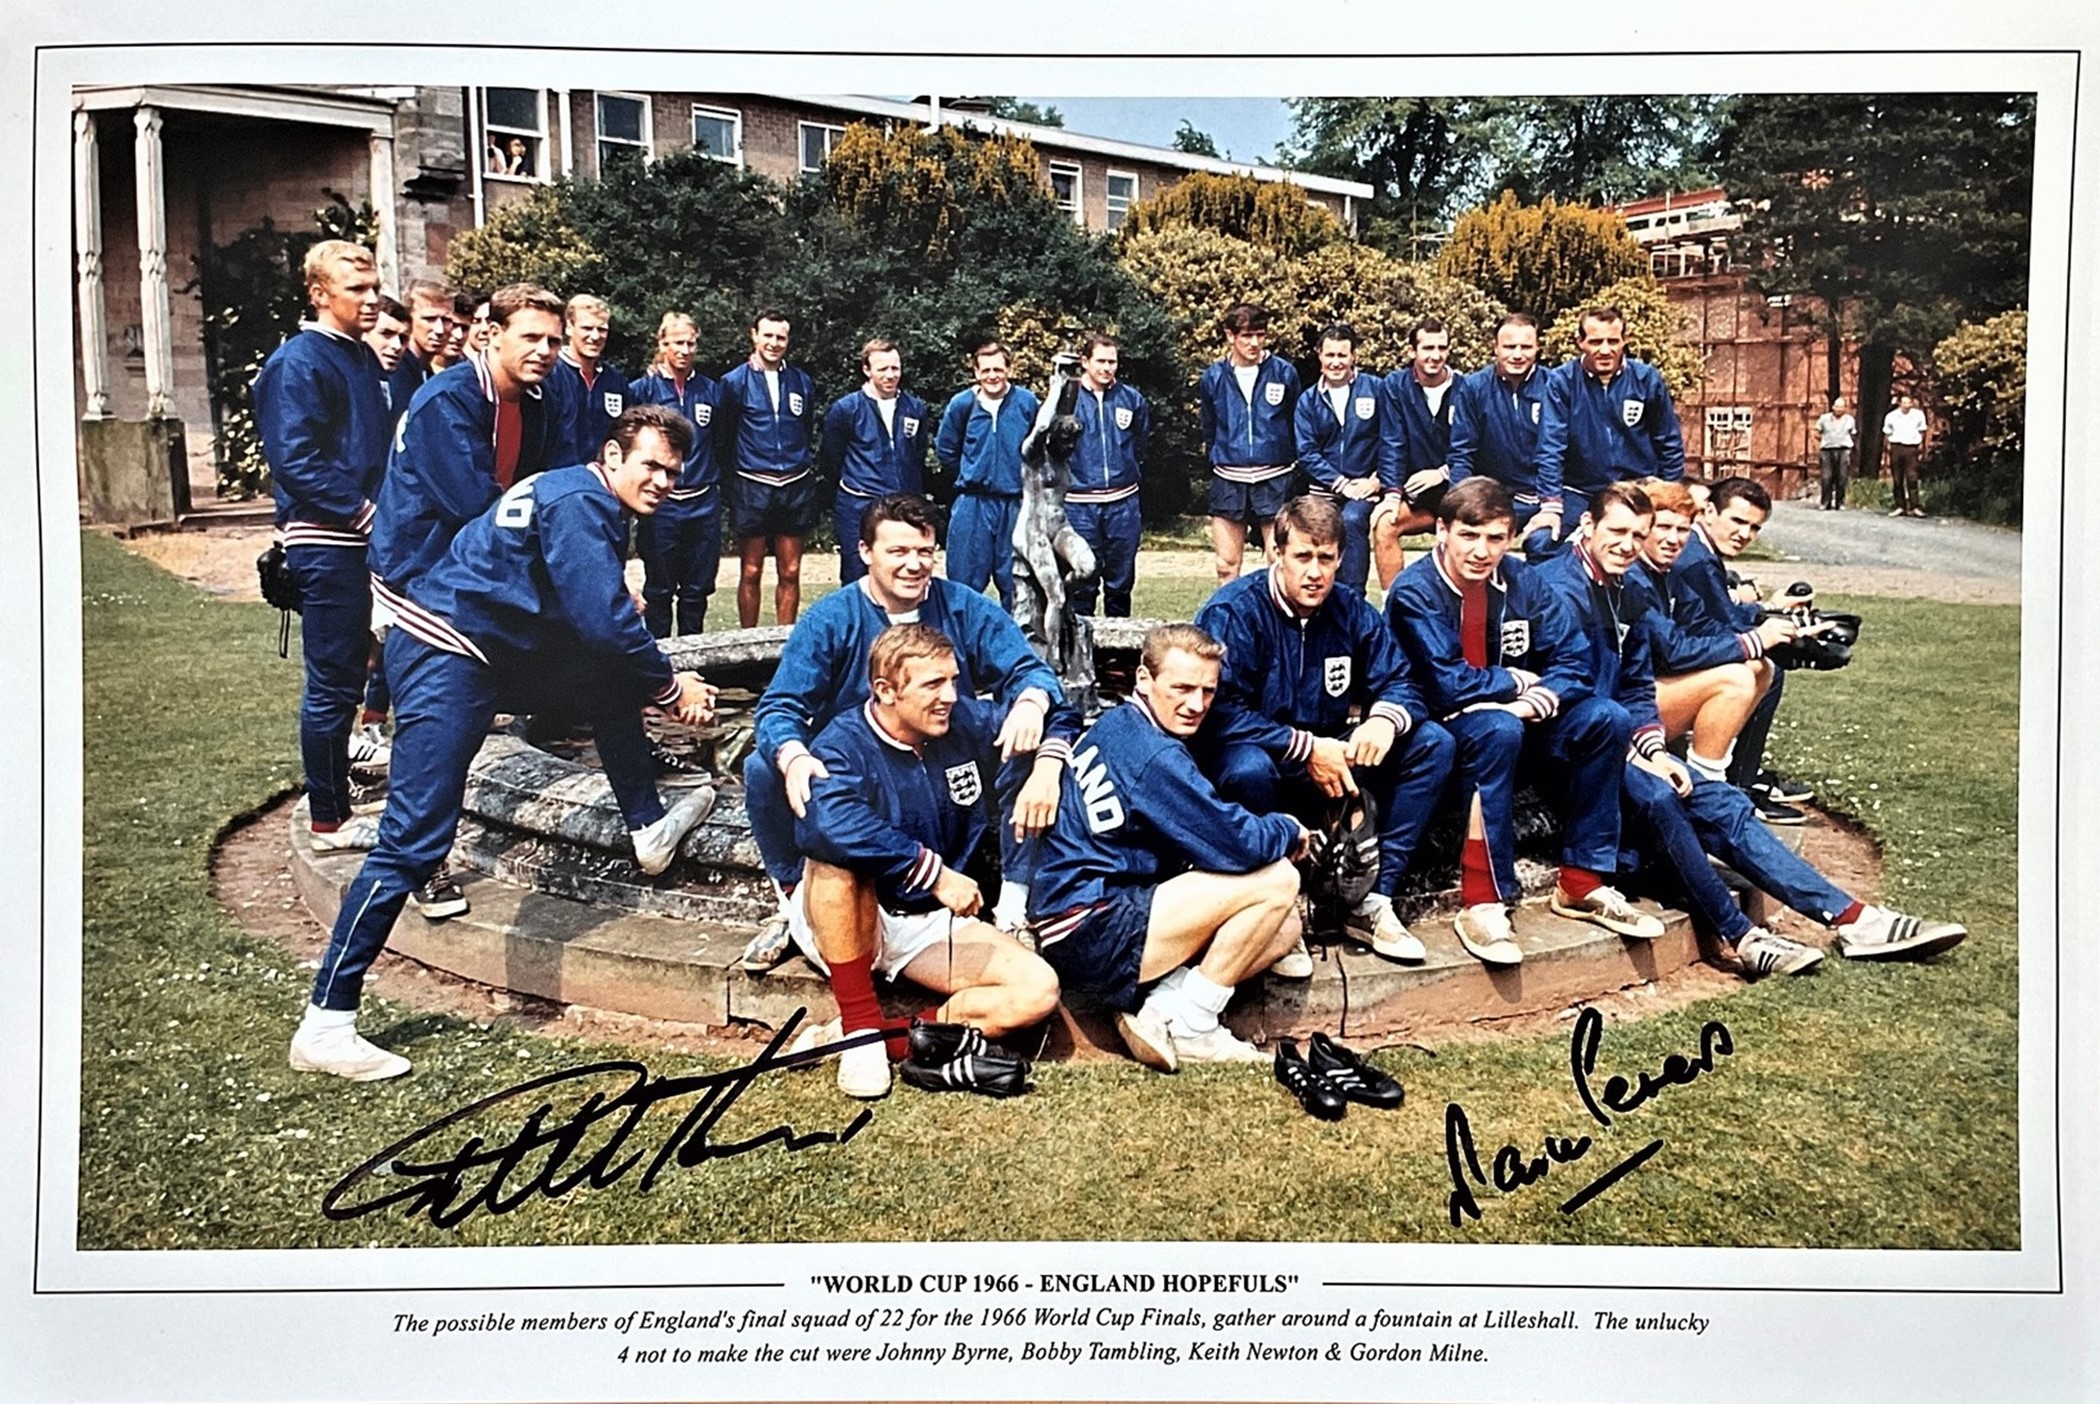 Football, Martin Peters and Sir Geoff Hurst signed 12x18 colour photograph picturing the 1966